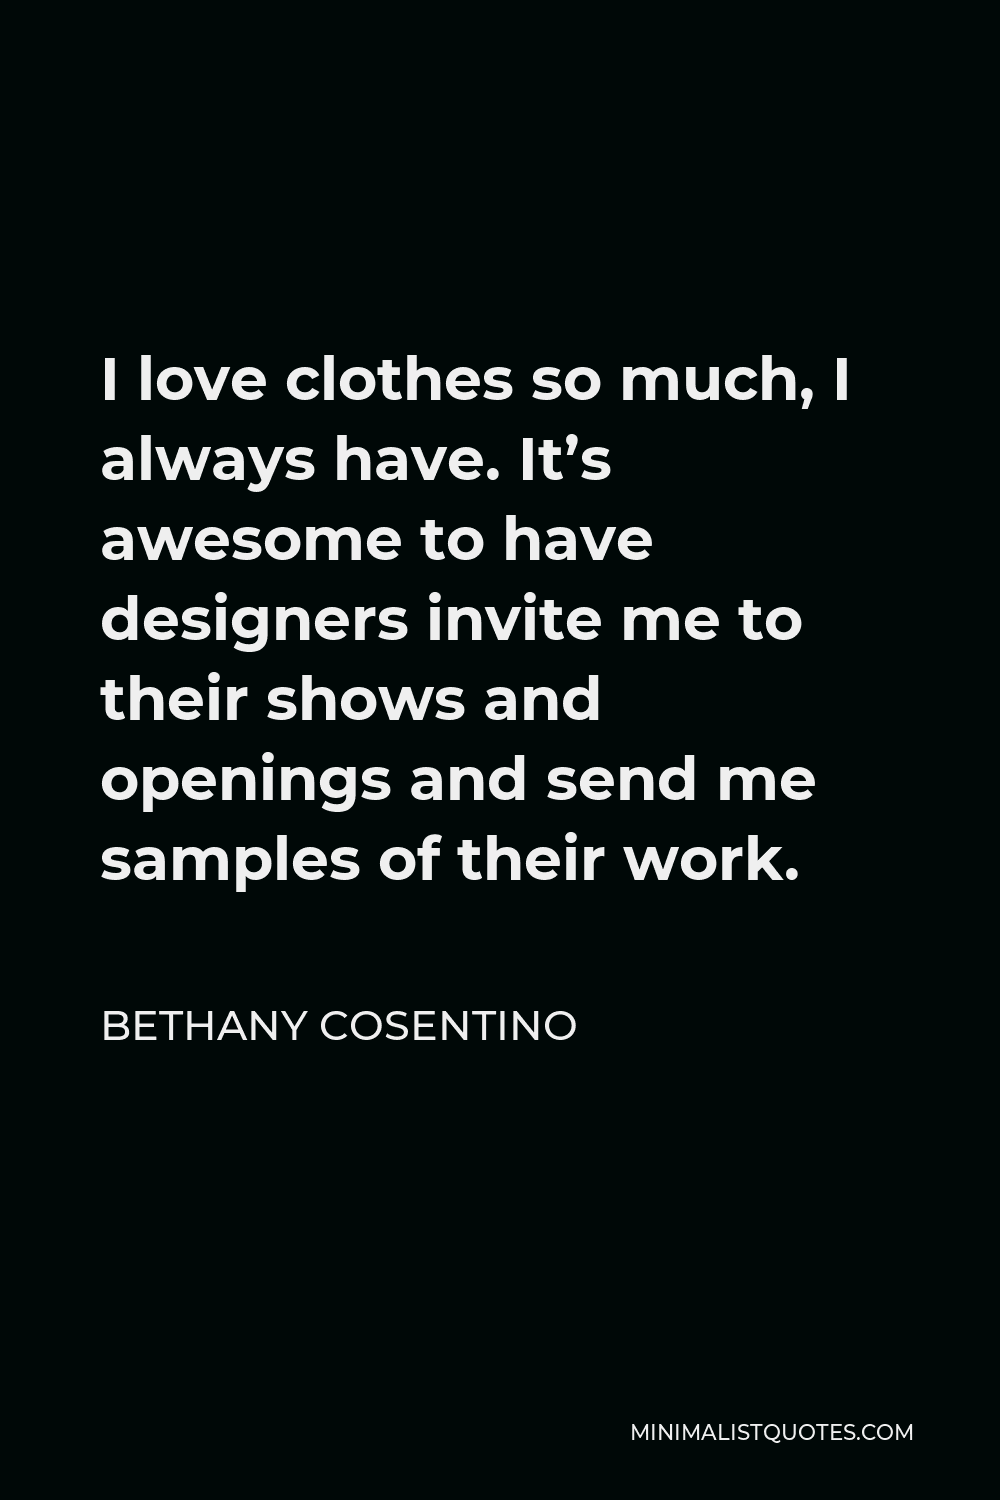 Bethany Cosentino Quote - I love clothes so much, I always have. It’s awesome to have designers invite me to their shows and openings and send me samples of their work.